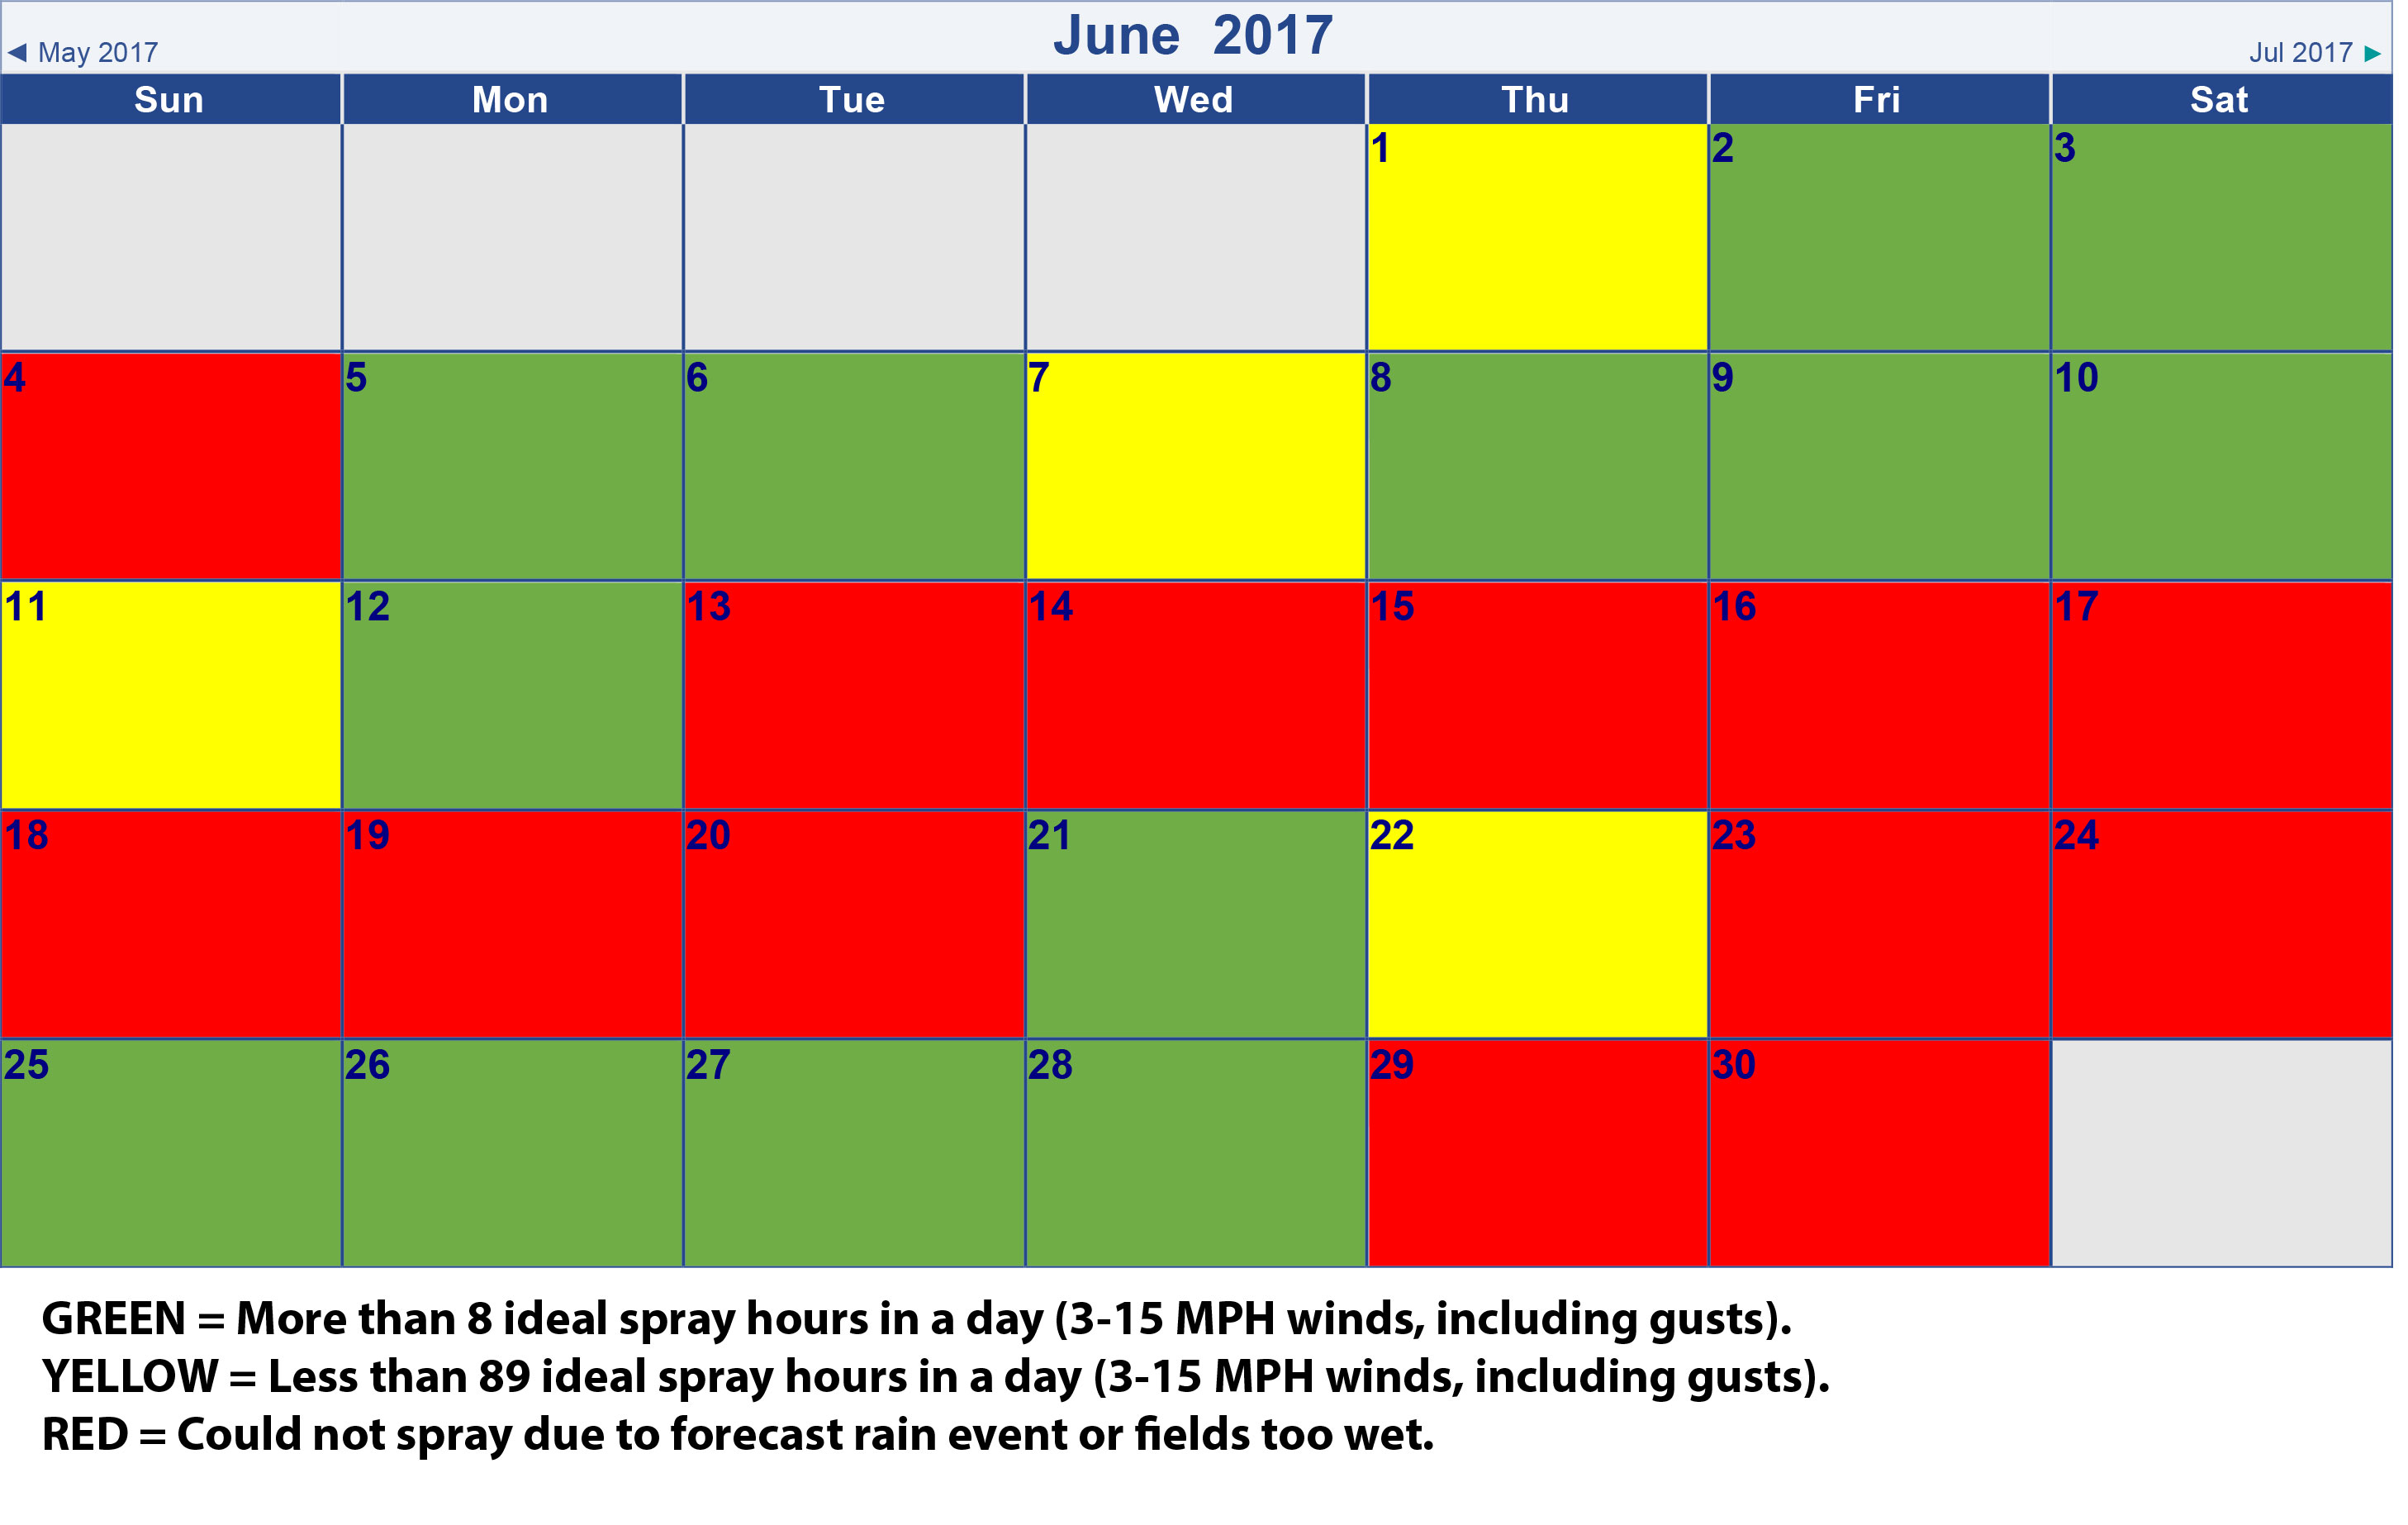 Figure 1. Spray days in June 2017 at the Agronomy Center for Research and Education (ACRE) near West Lafayette, IN. If a box is red, there were no spray hours that day due to field conditions or forecast rainfall. If a box is green, there were more than 8 hours in a day where winds were between 3 and 15 MPH (including gusts). If a box is yellow, there were less than 8 hours in a day where winds were between 3 and 15 MPH (including gusts).
     